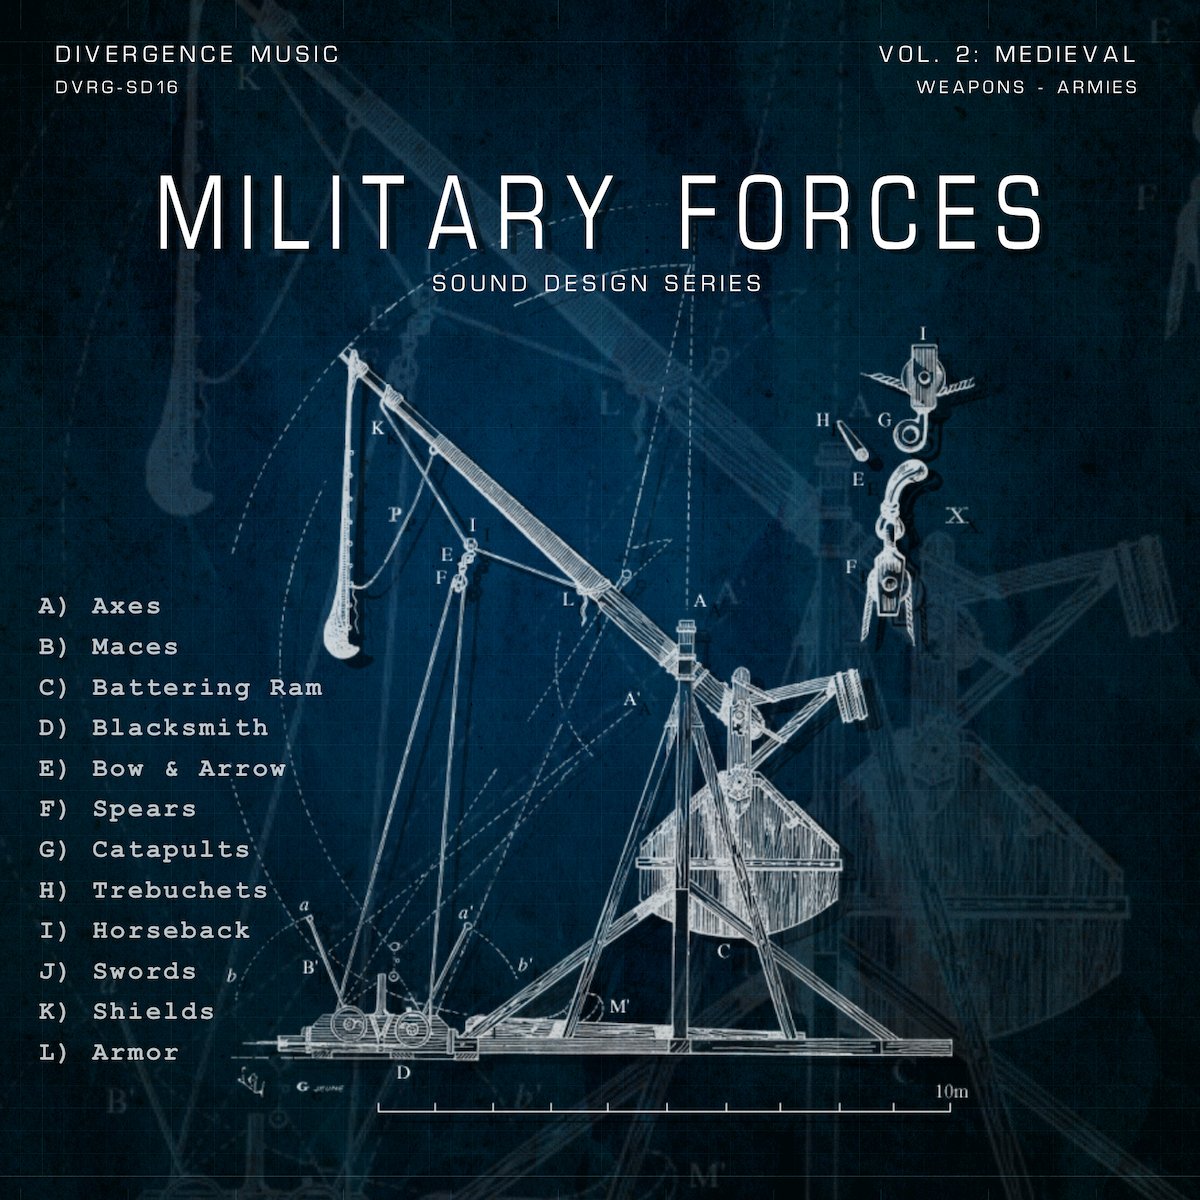 DVRG-SD16 Military Forces_ vol2 Medieval - Weapons & Armies (sound design)_cover.jpg